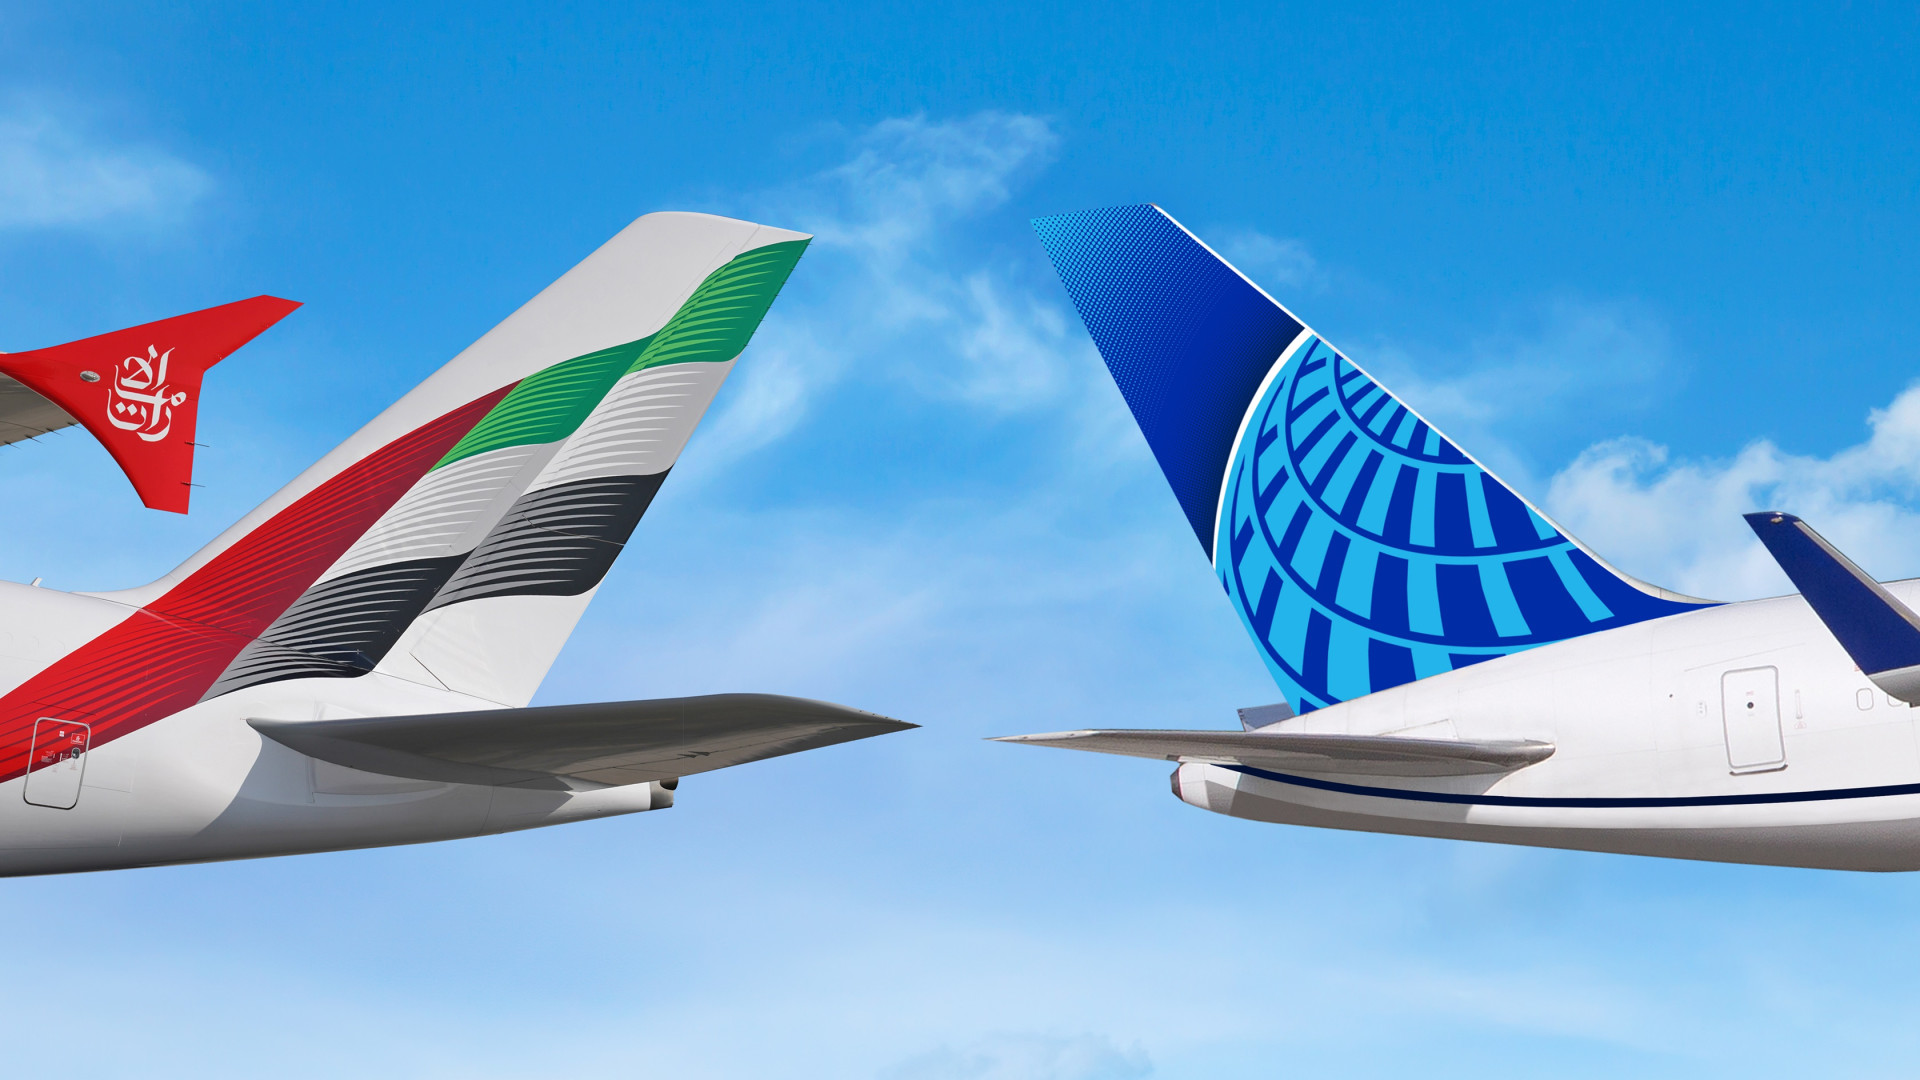 Emirates and United expand codeshare partnership to include